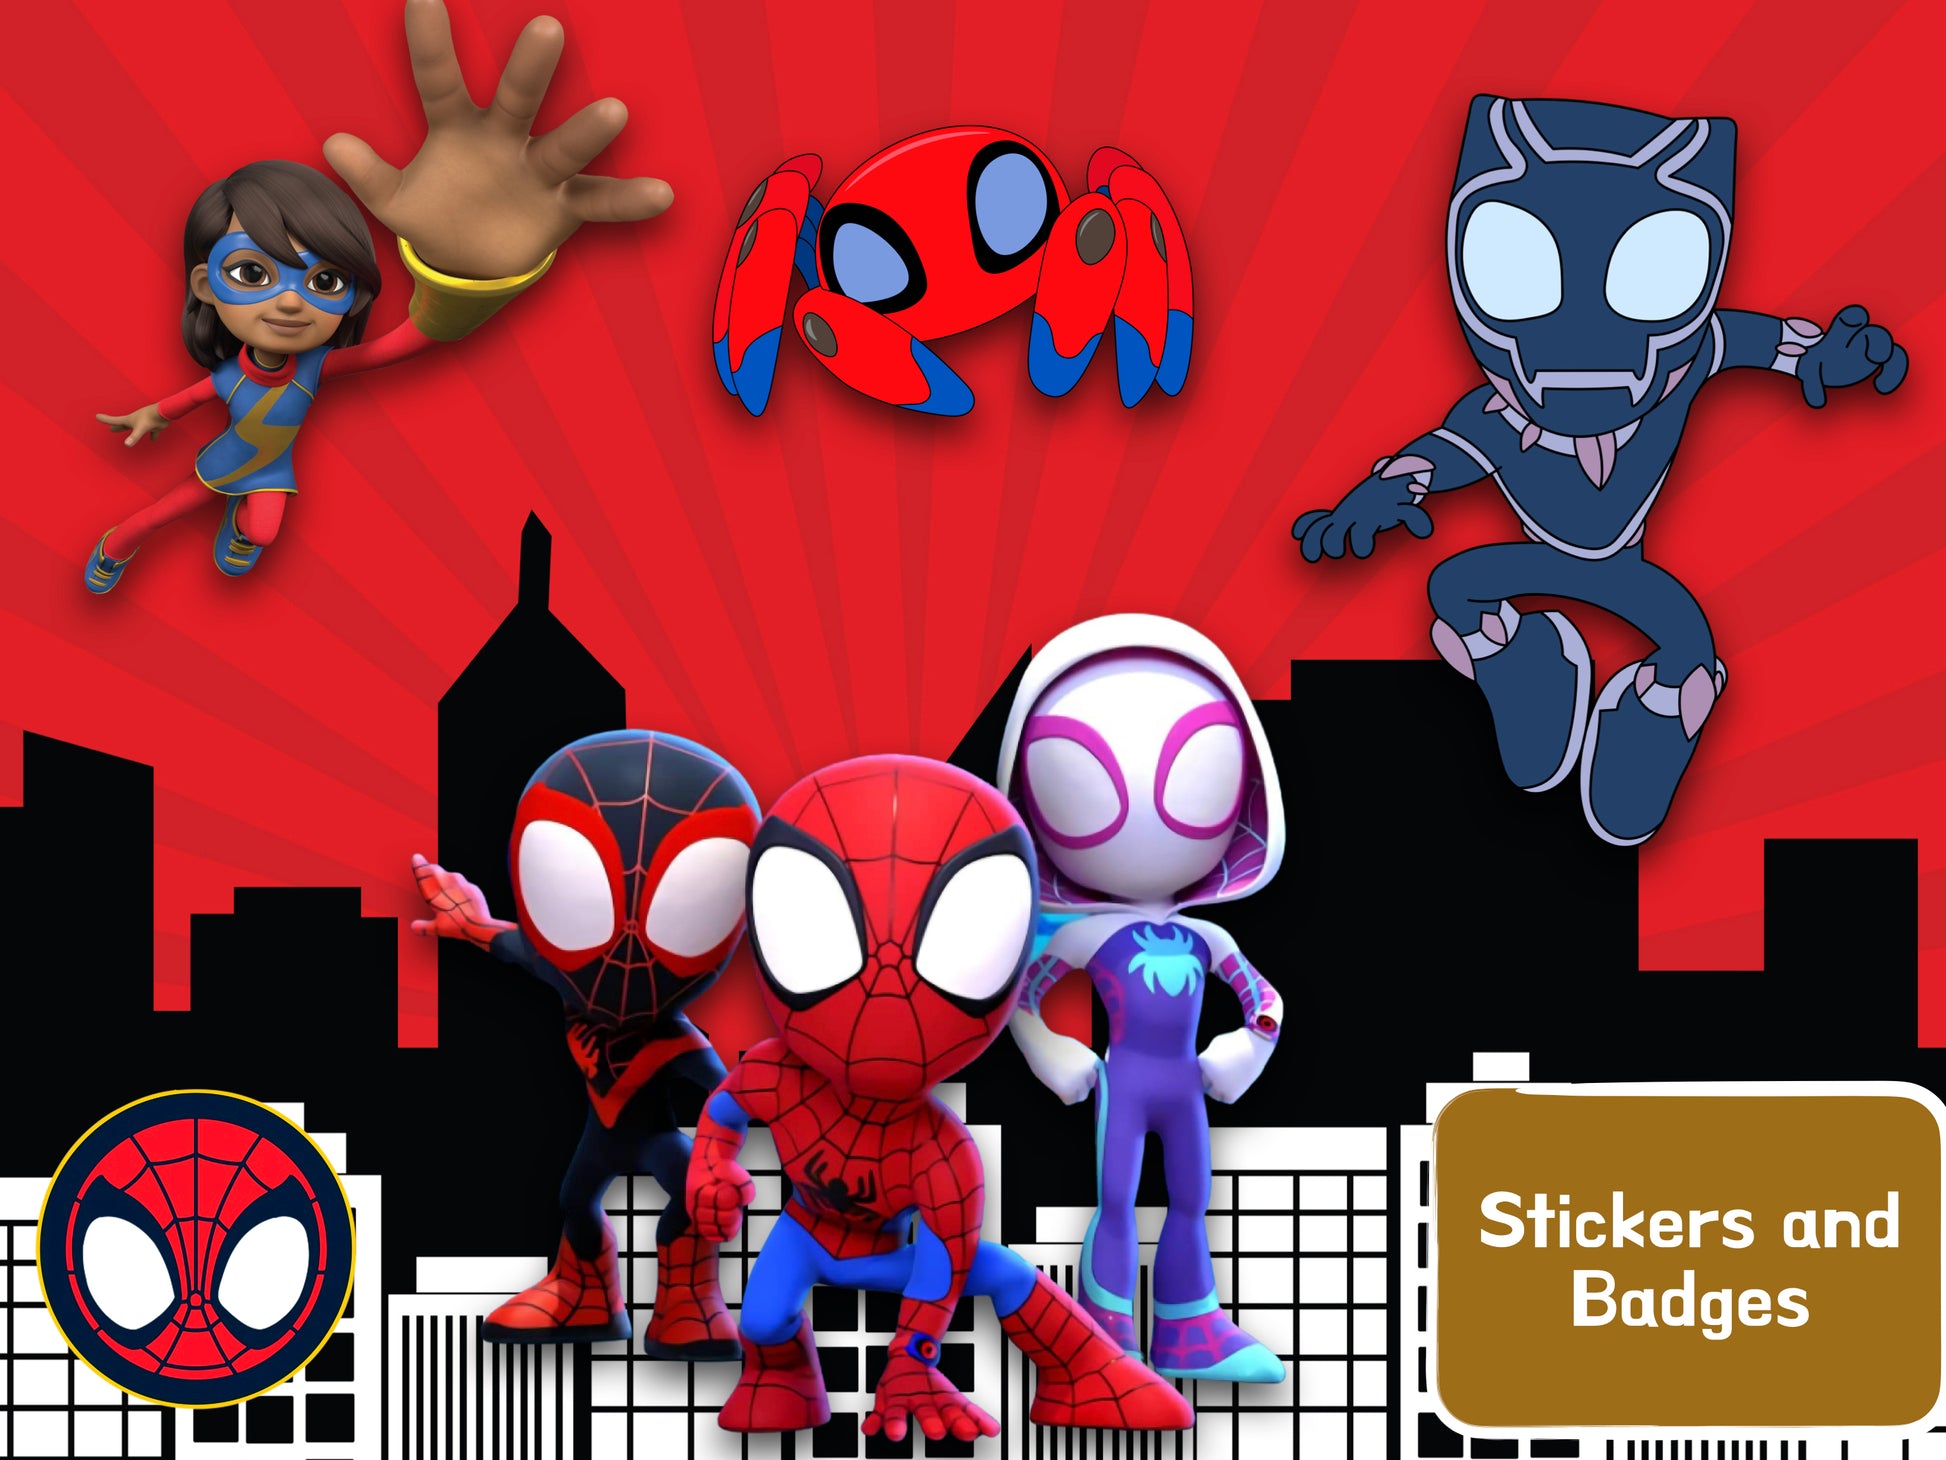 Spidey and Friends Digital Images 